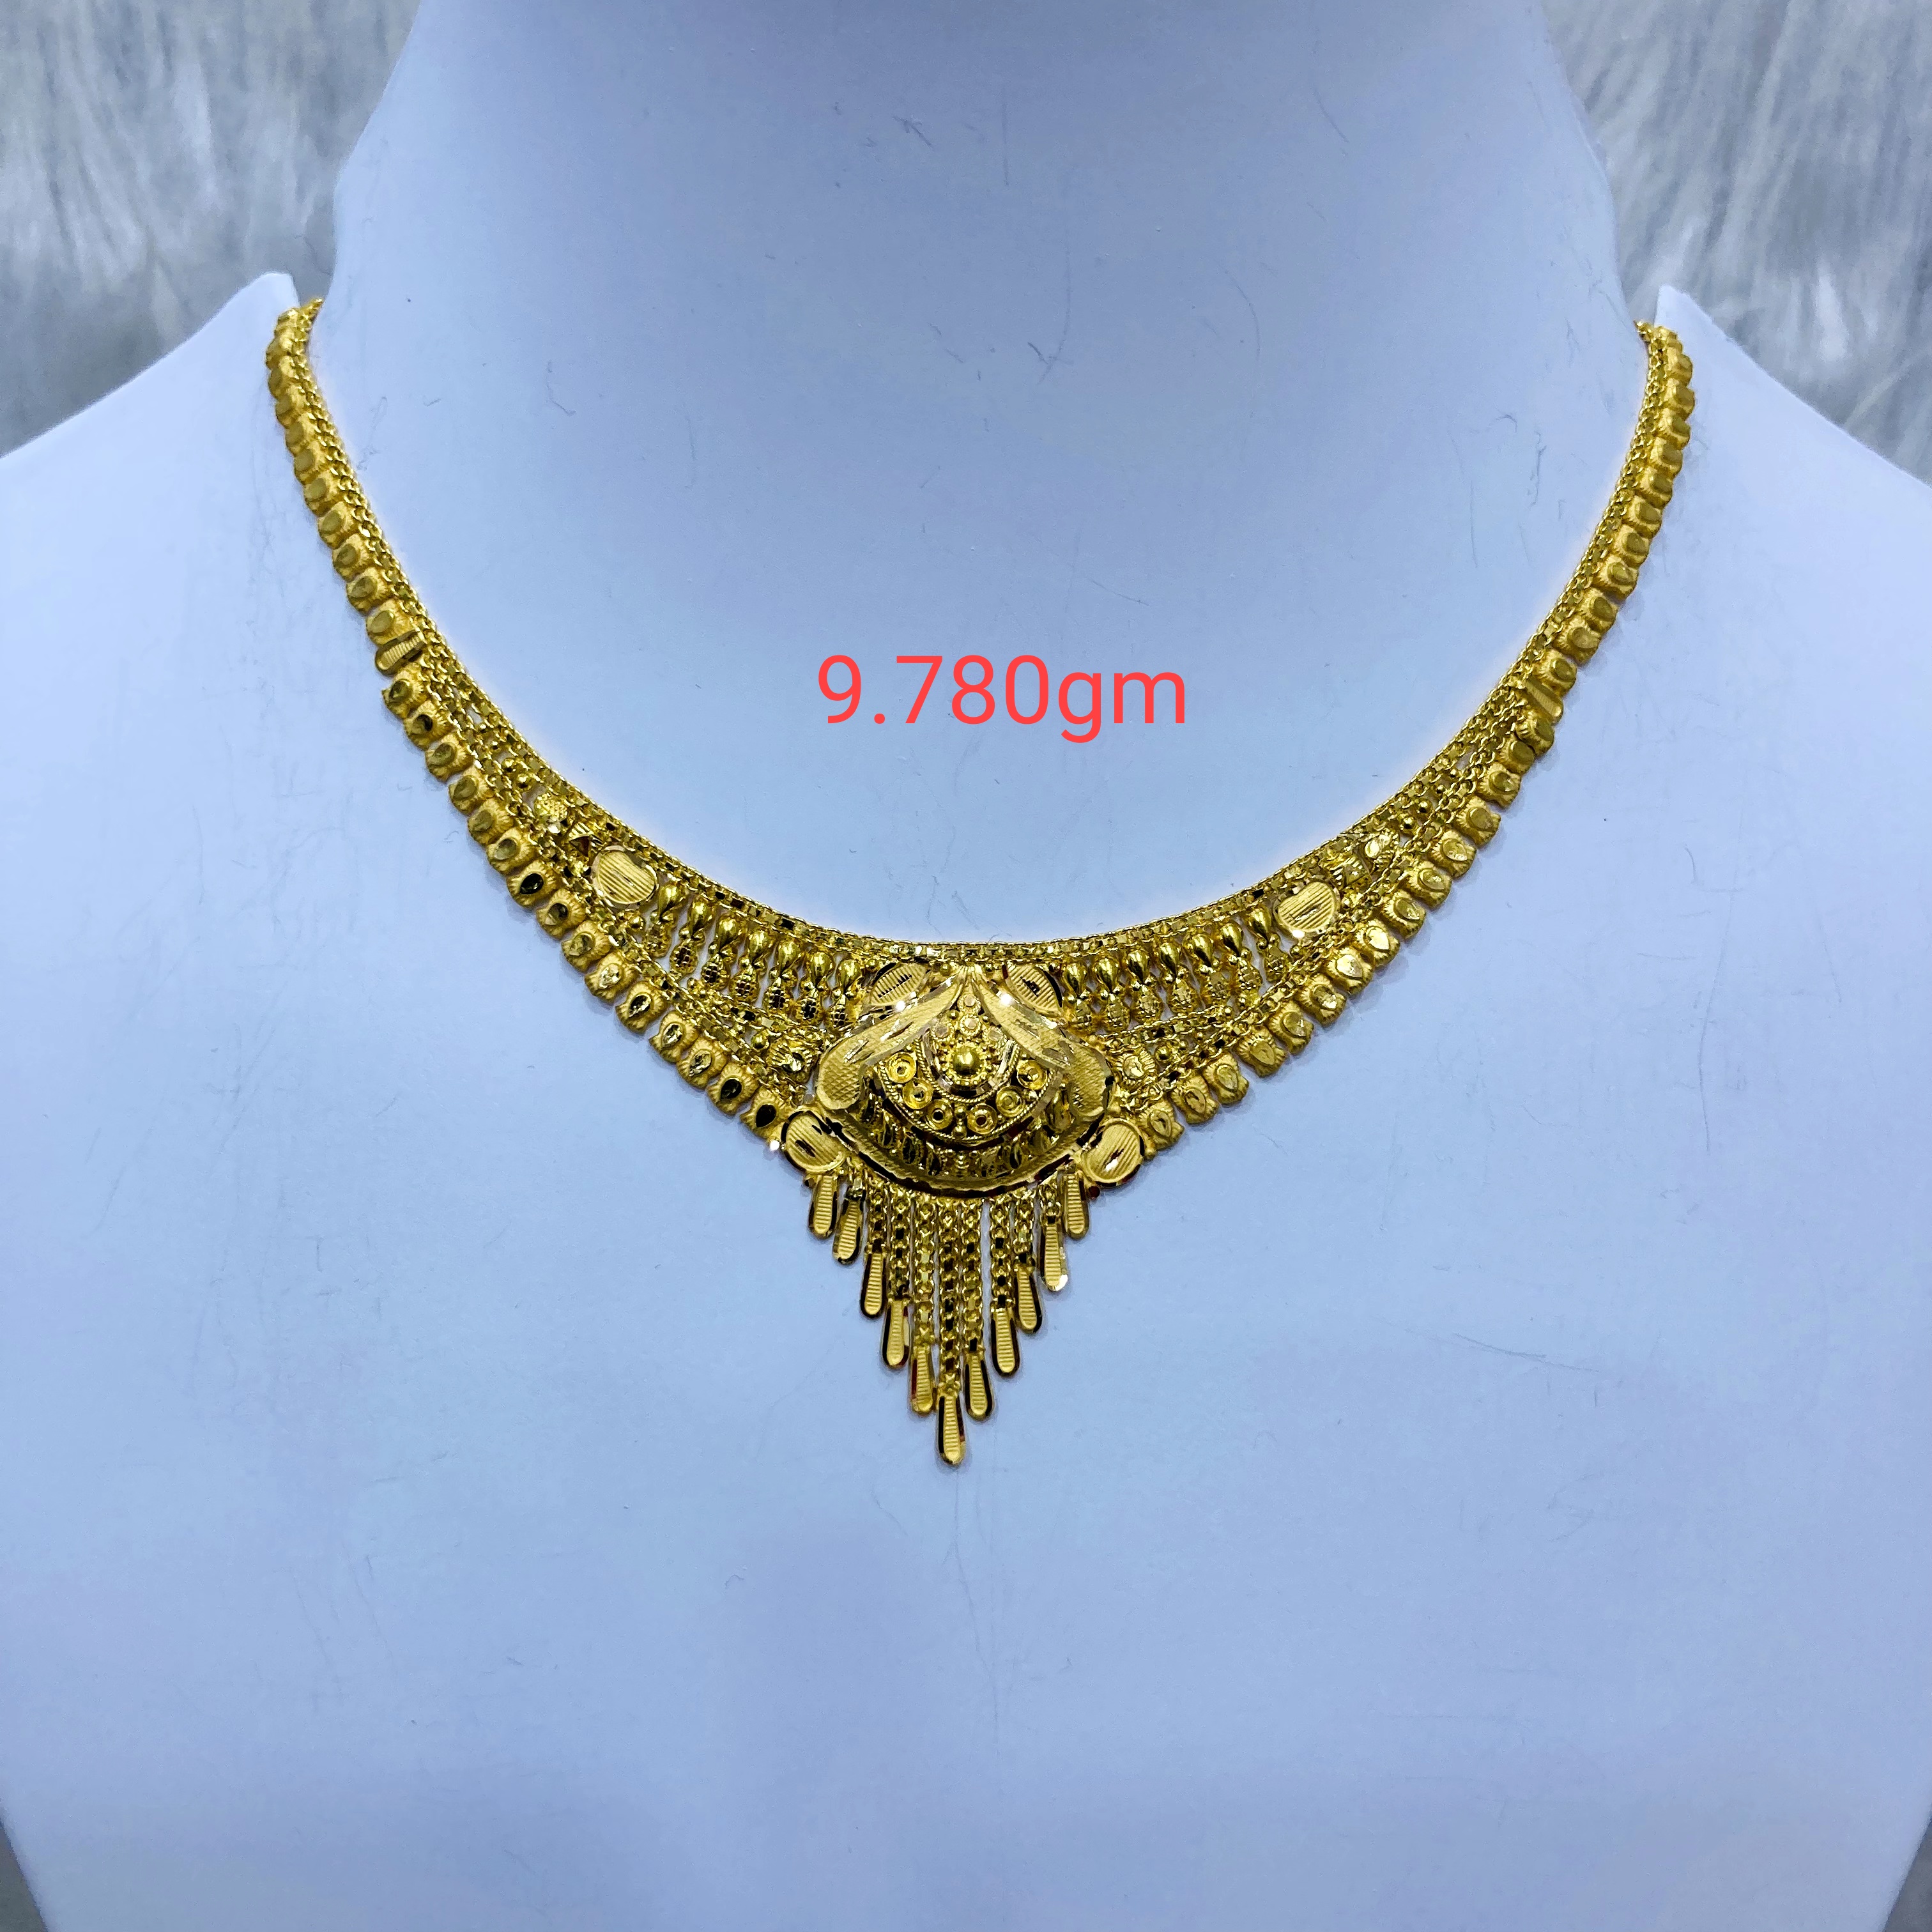 Latest Gold Choker Necklace Designs with weight And Price || Latest Bridal  Gold Necklace Design… | Choker necklace designs, Gold necklace designs, Necklace  designs